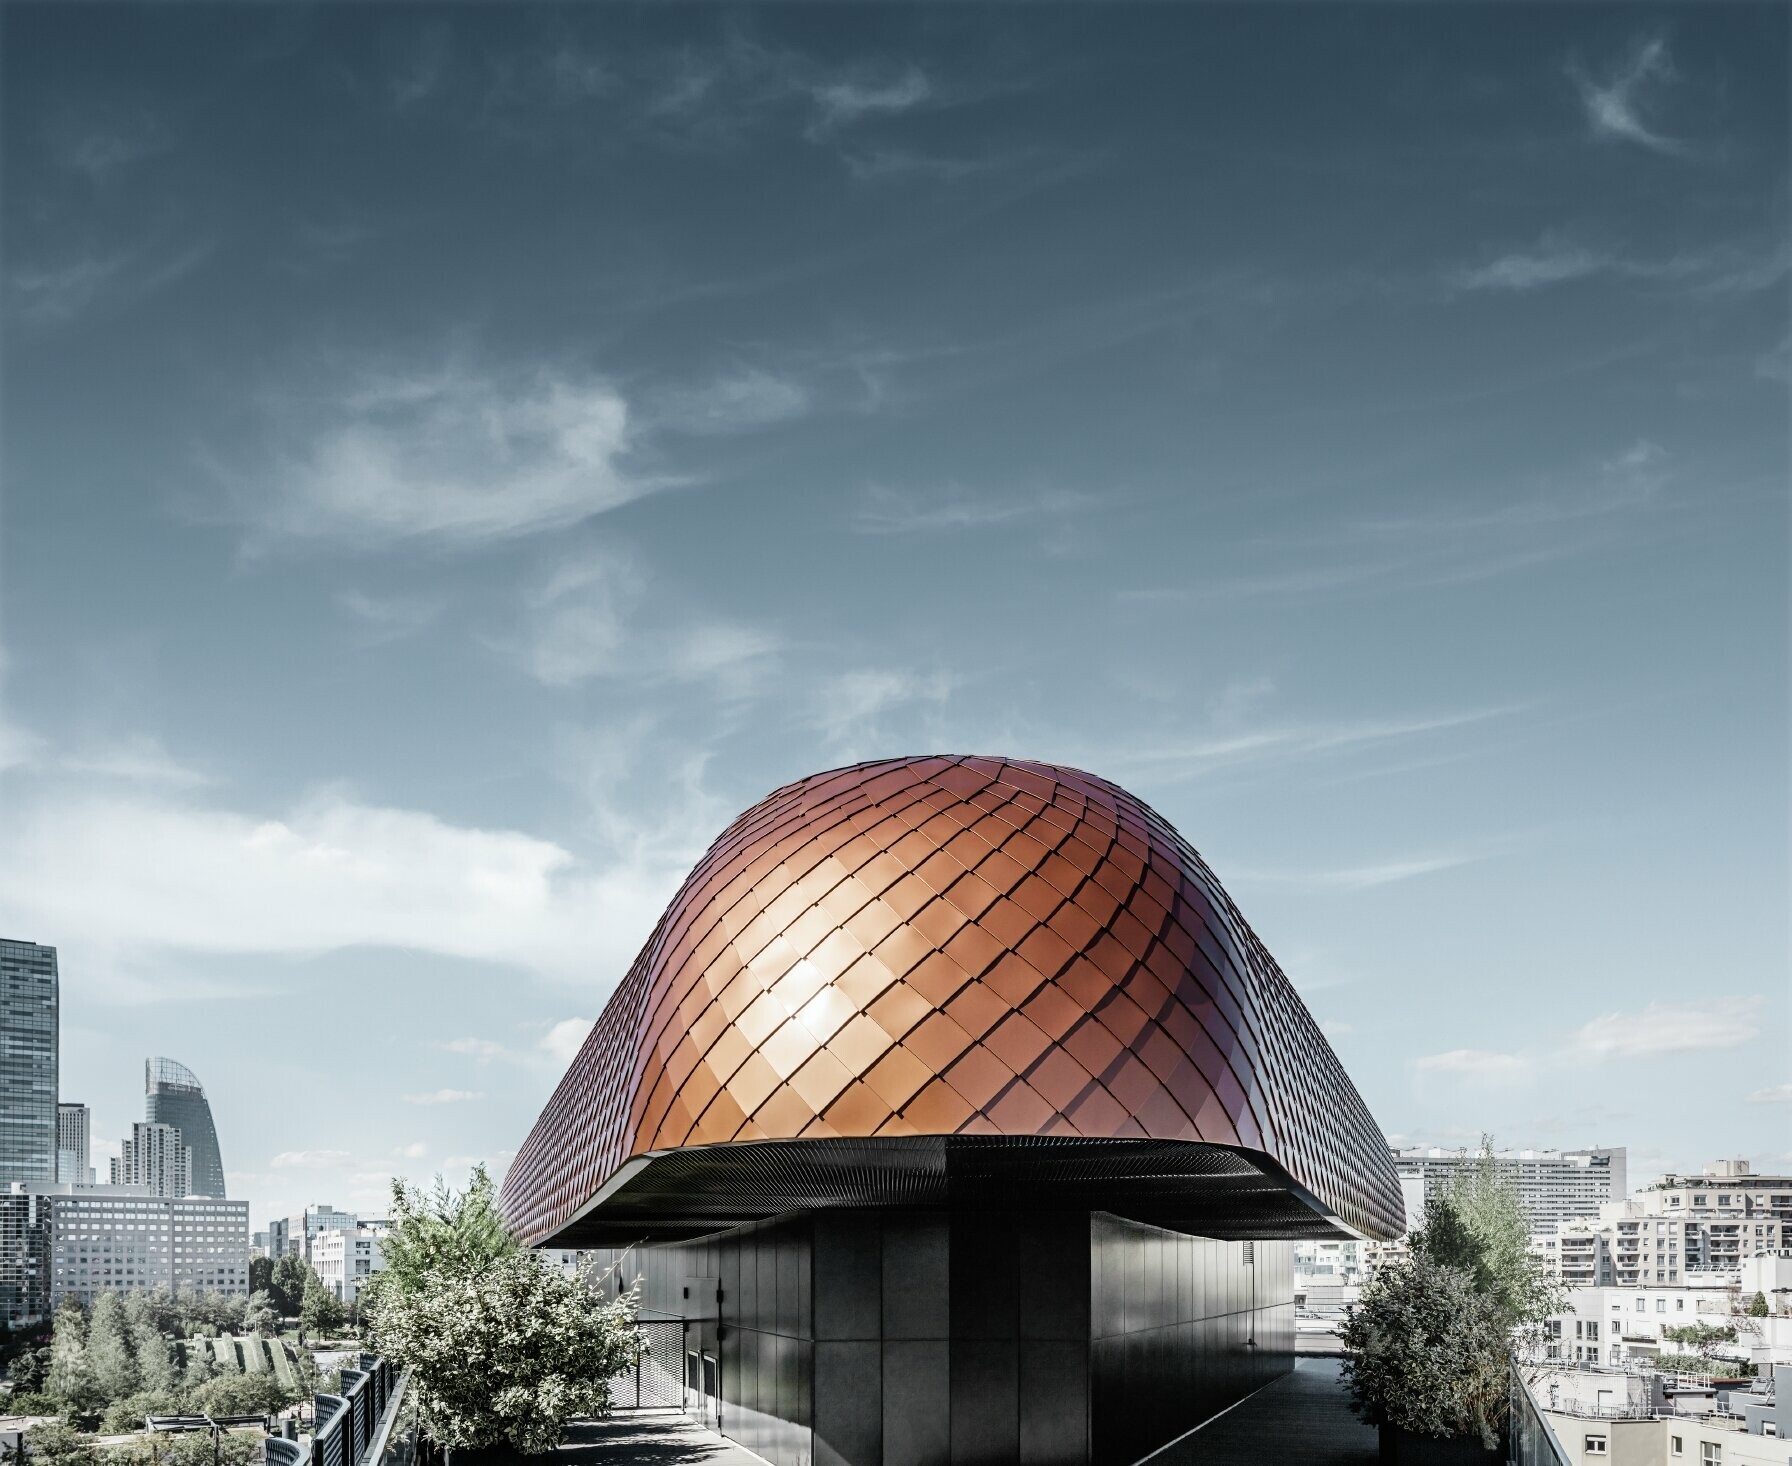 The rounded design of the Blackpearl office building in Paris was clad in the PREFA 29 x 29 rhomboid roof tile.